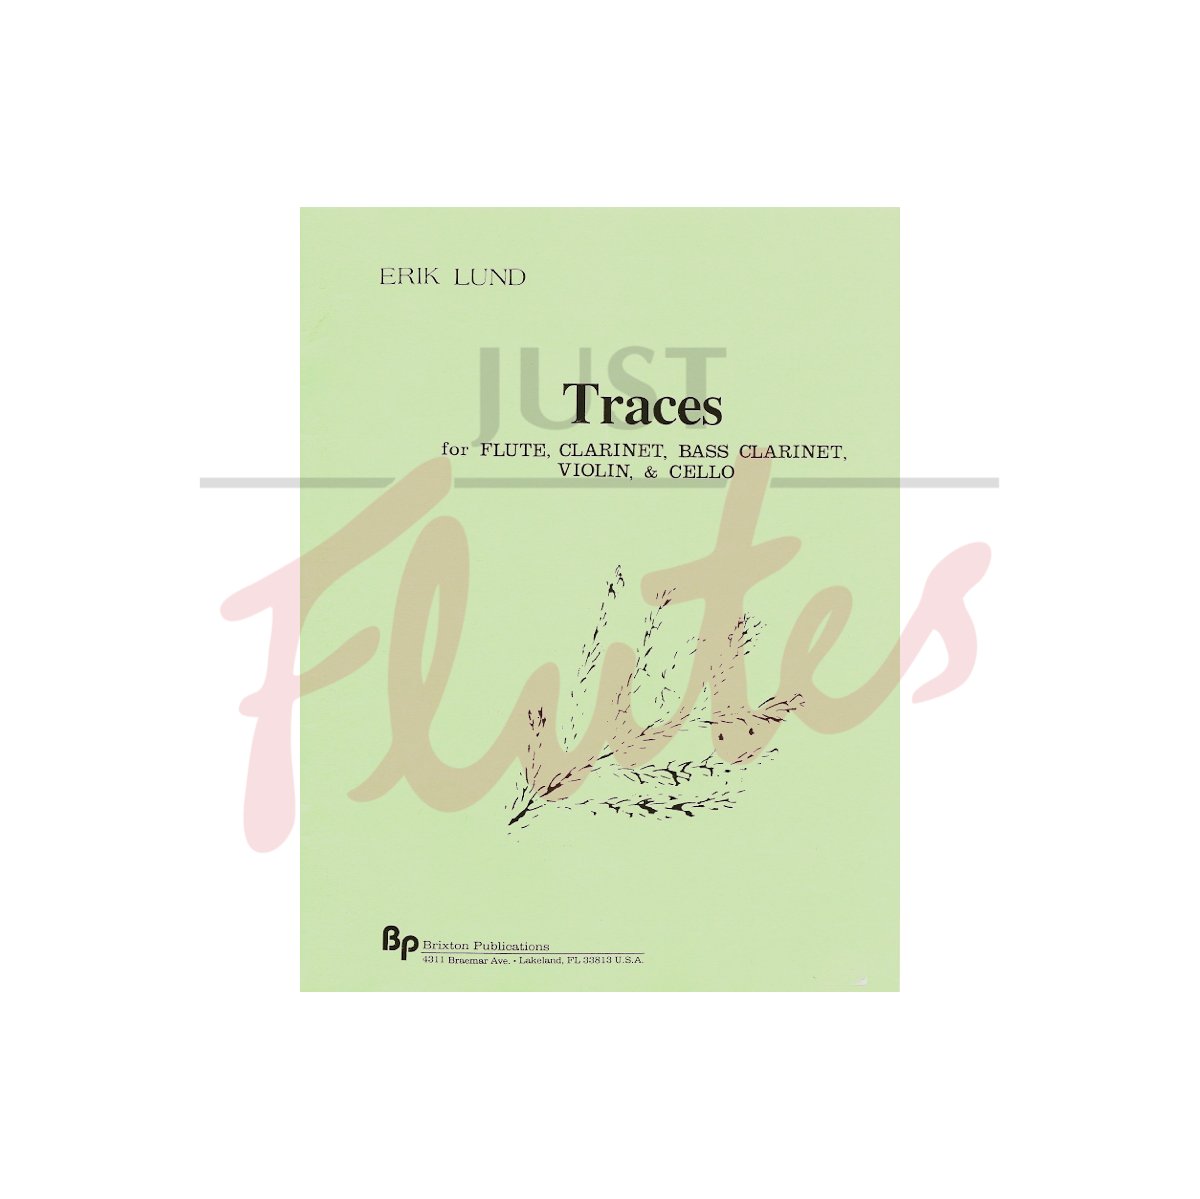 Traces for Flute, Clarinet, Bass Clarinet, Violin and Cello